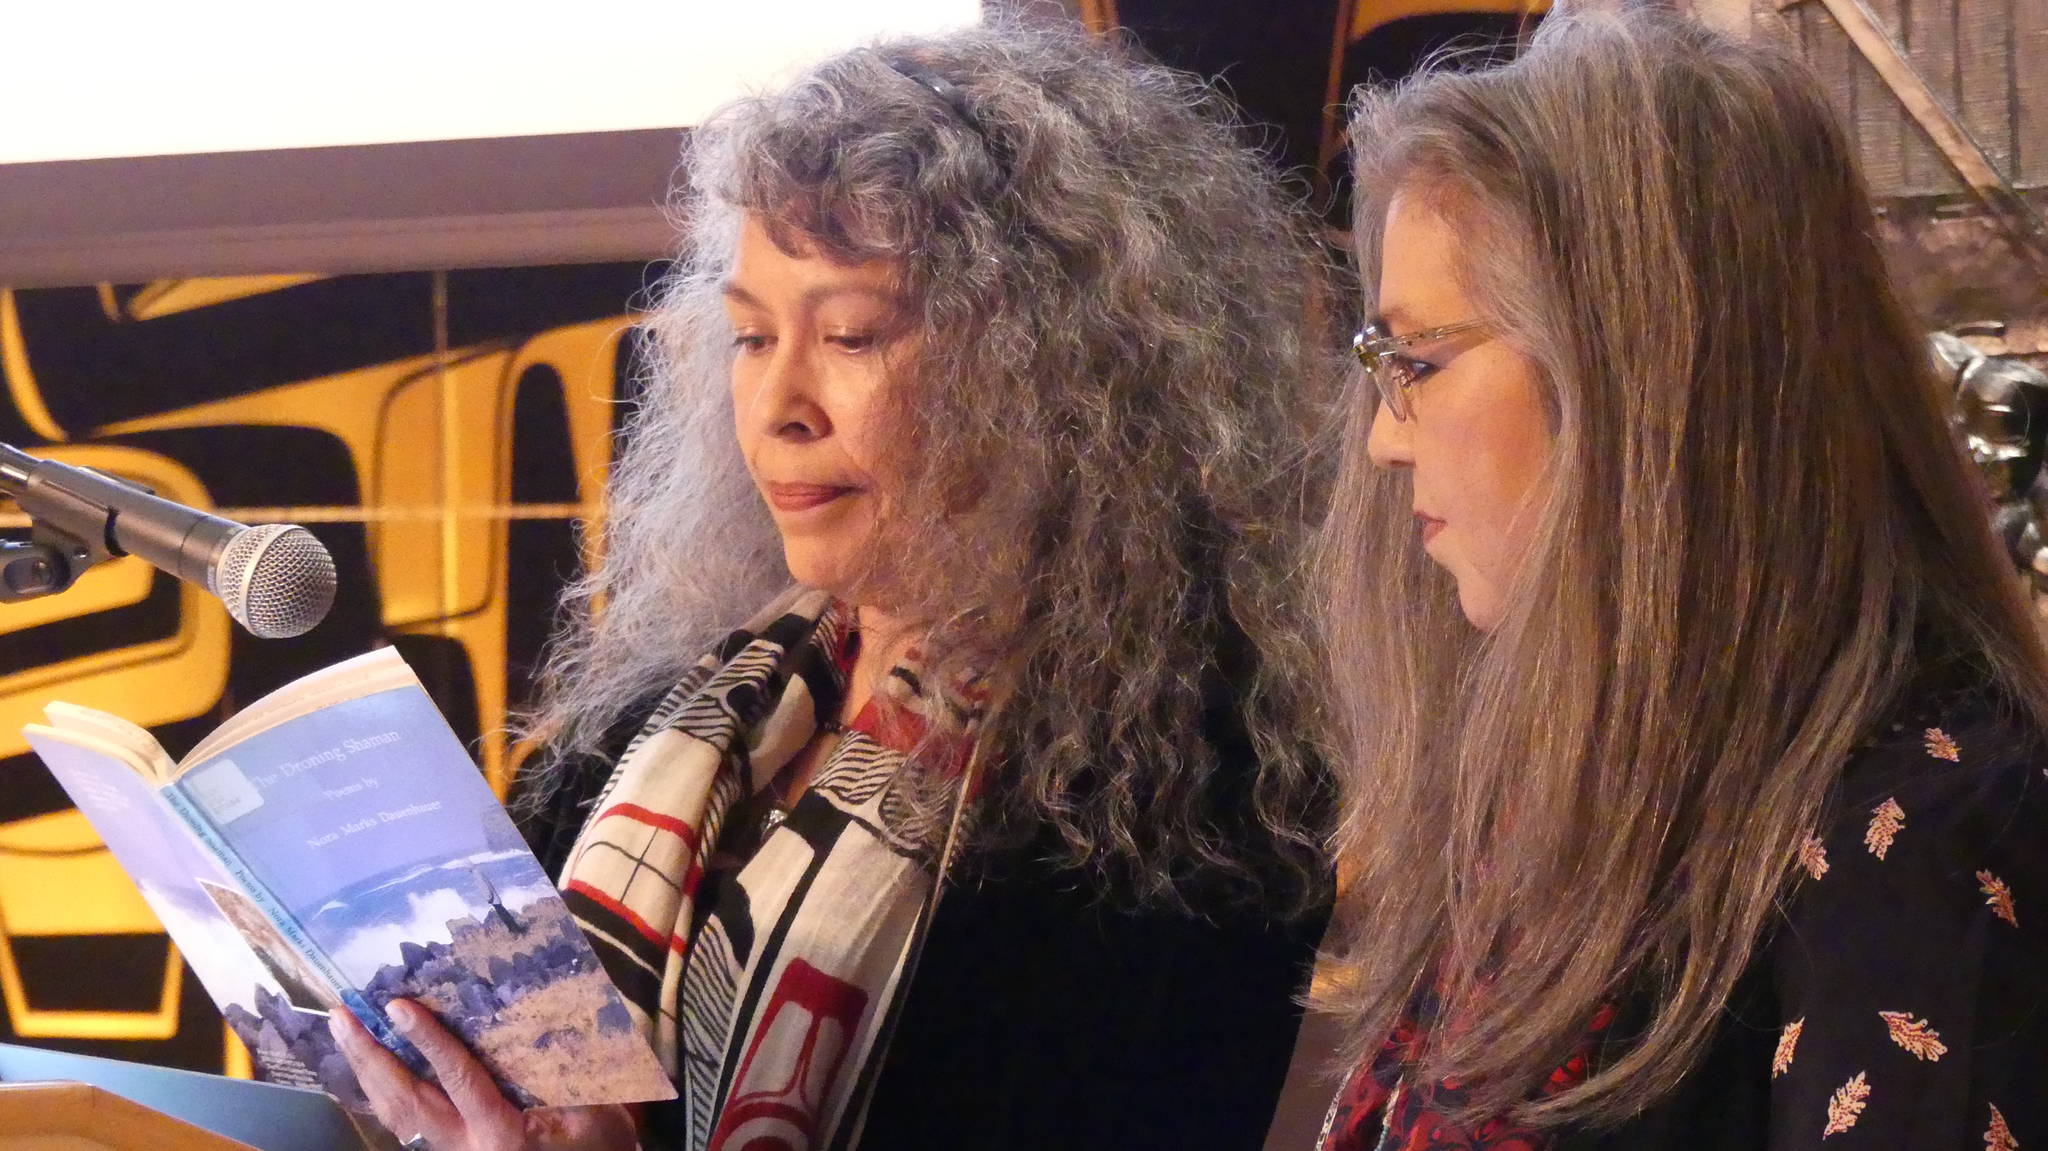 Donna Beaver and Rhonda Mann review a poem together from Nora Dauenhauer’s poetry book, “The Droning Shaman.” Beaver and Mann both read poems by Dauenhauer in her honor. Ray Friedlander | For the Capital City Weekly